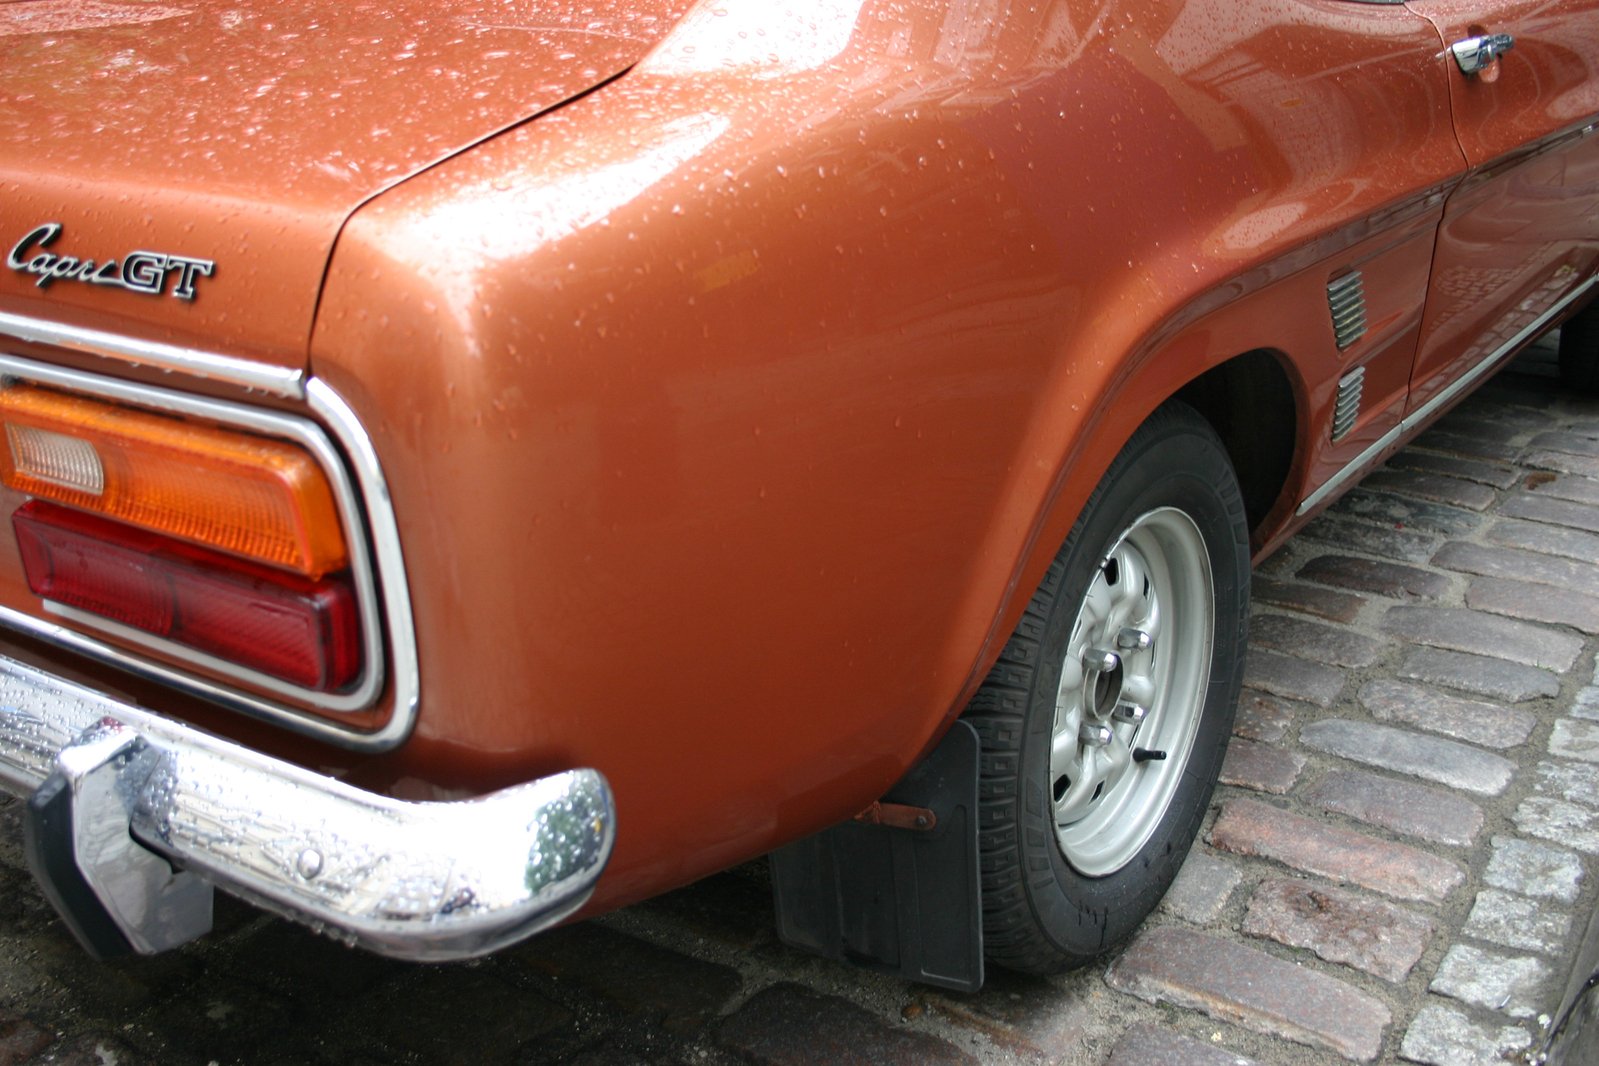 the back end of an orange vehicle with a red ke disk